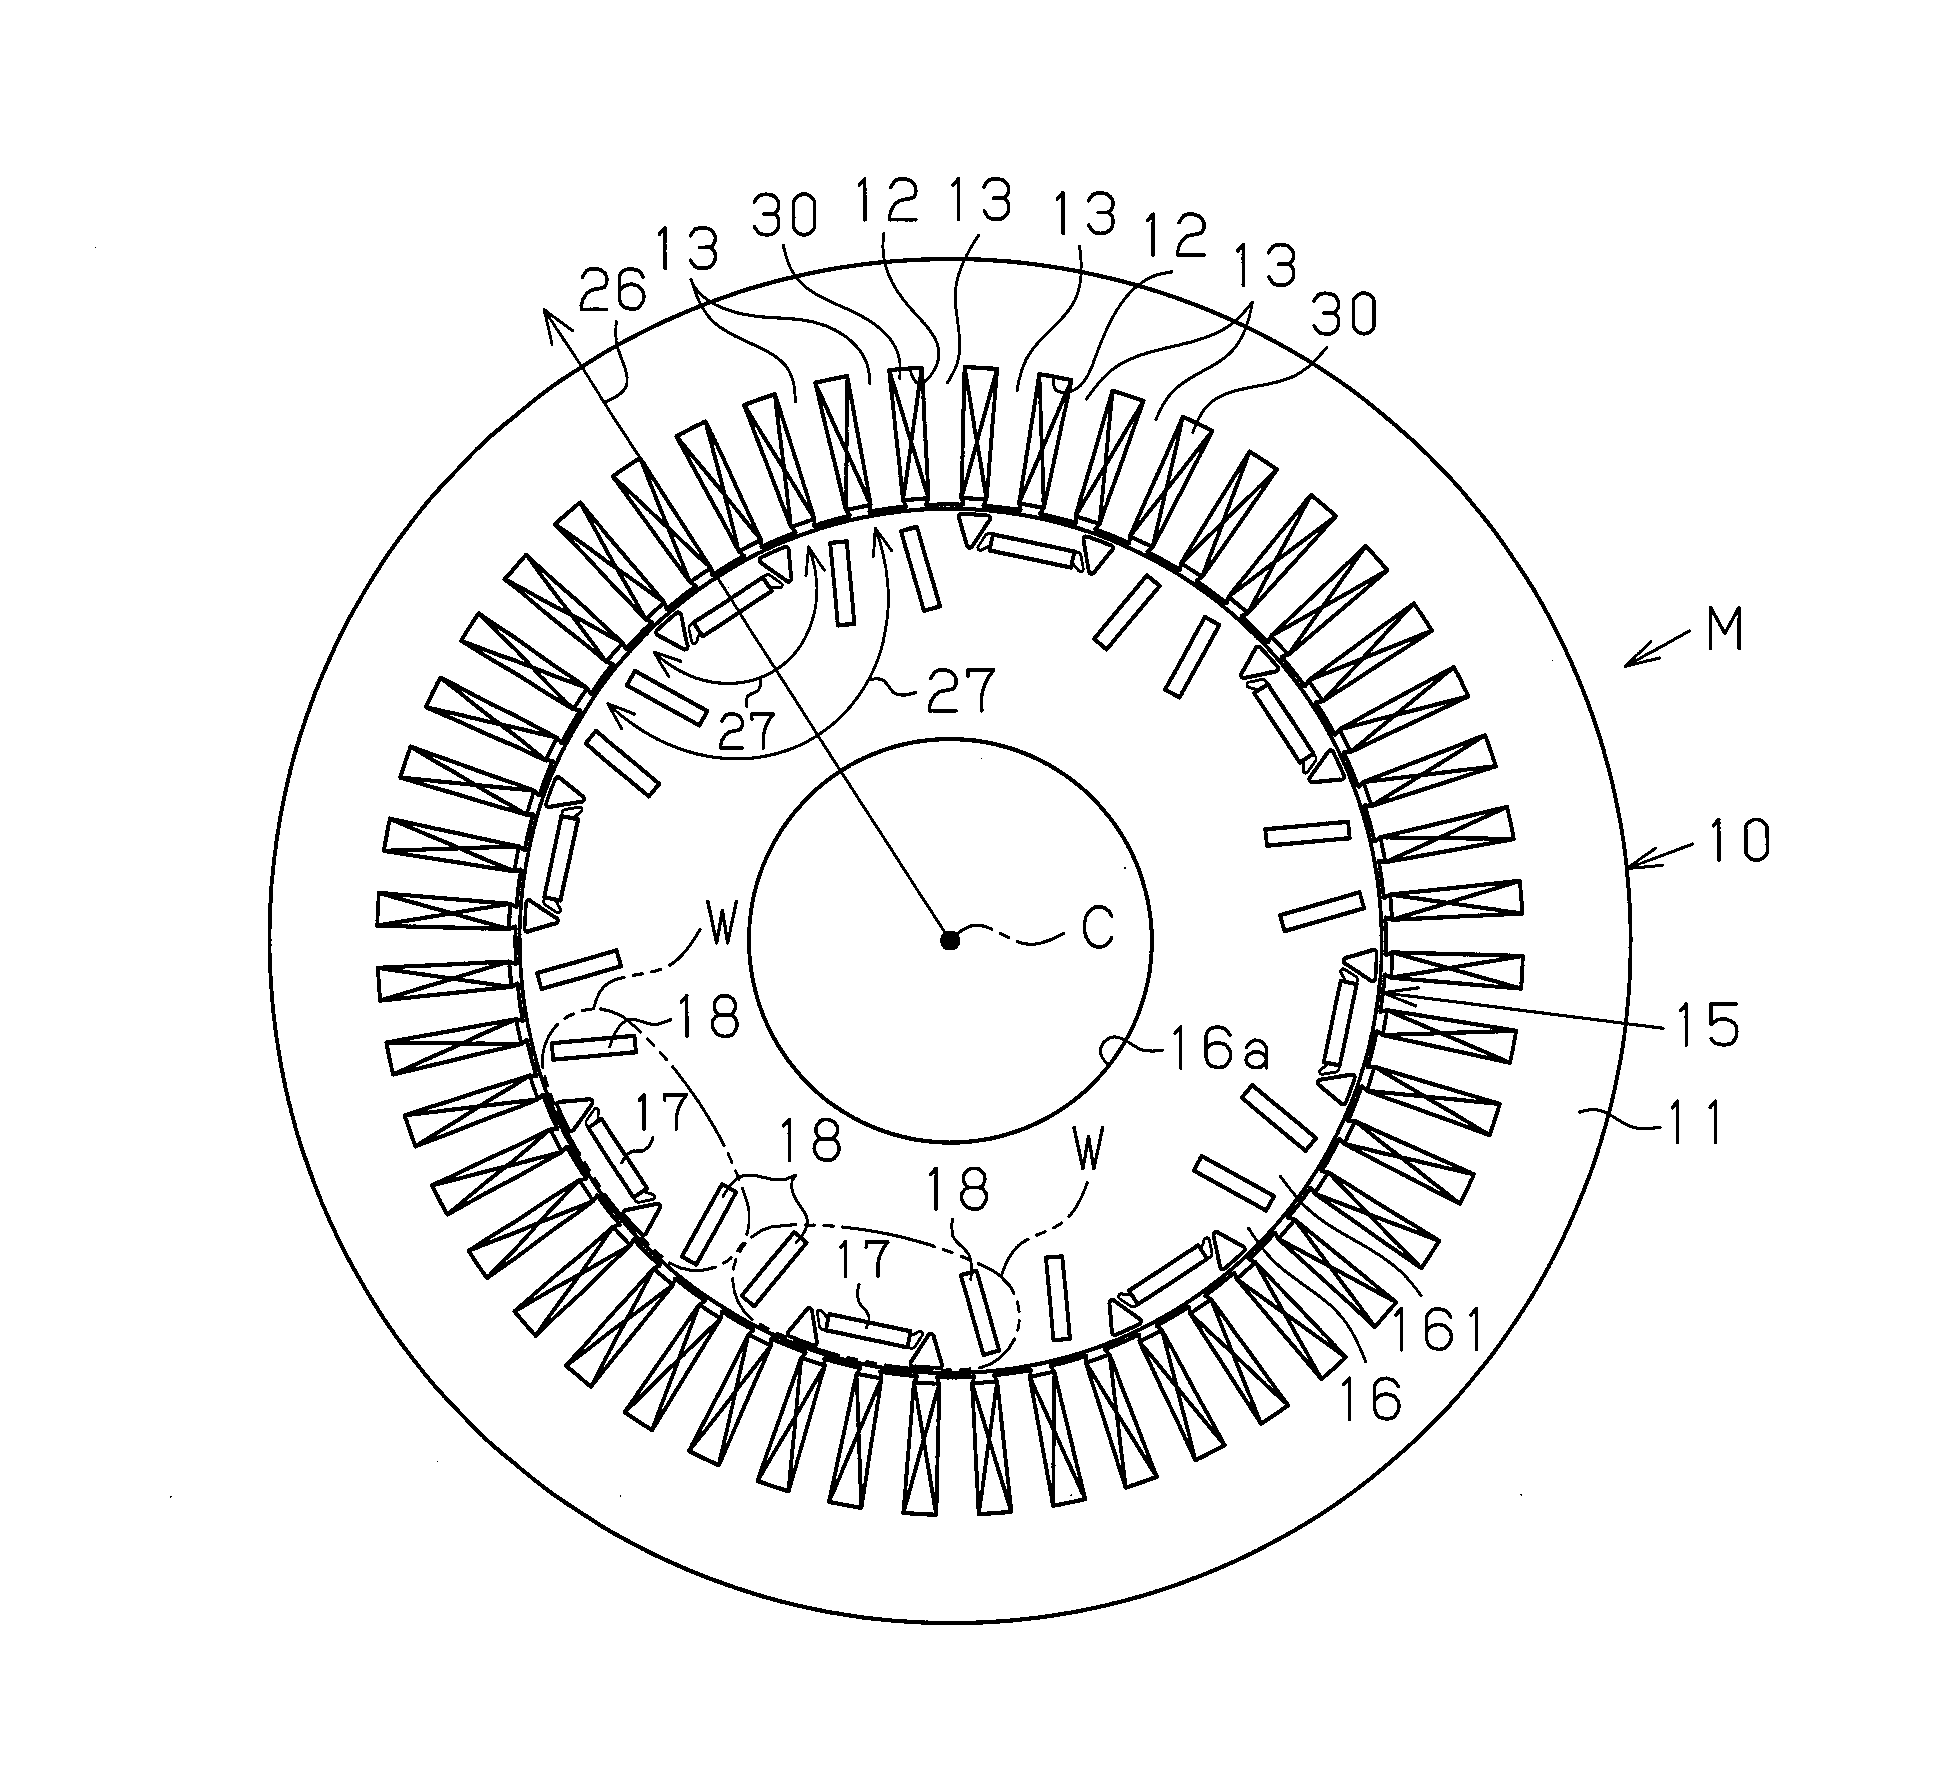 Rotating element with embedded permanent magnet and rotating electrical machine